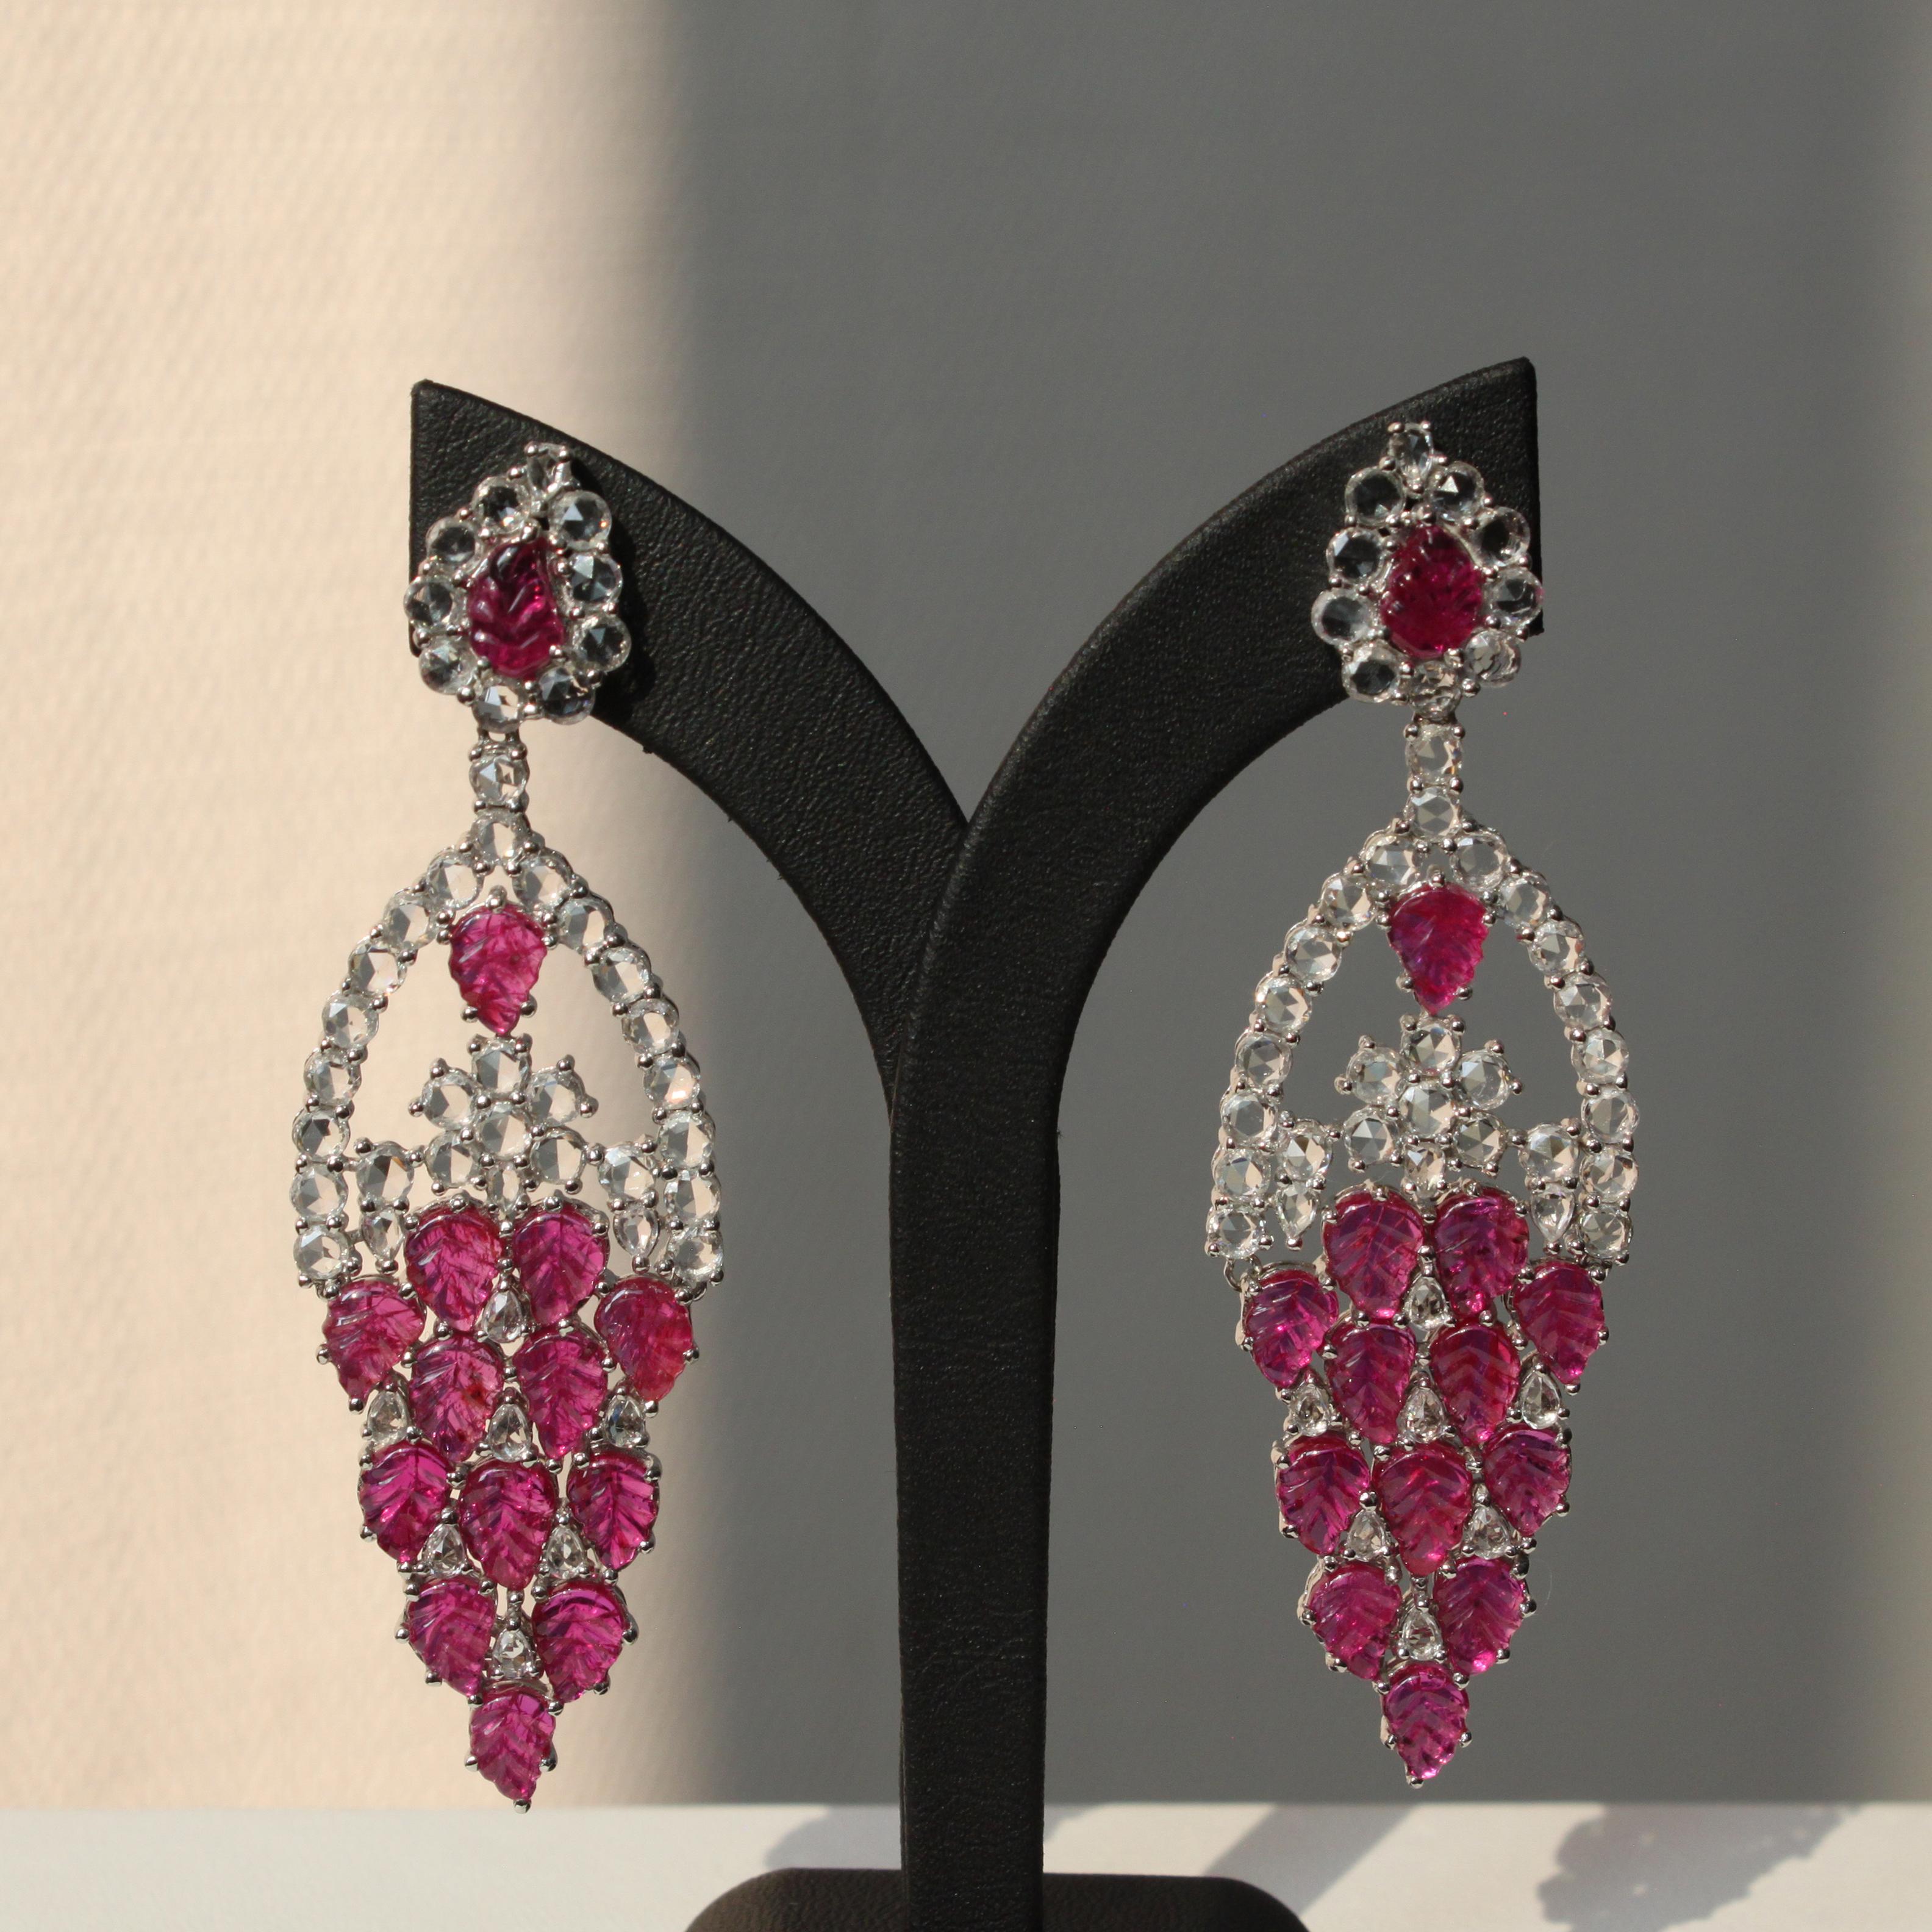 14K white gold
15.39 ct ruby
8.59 ct white sapphire
Total earring weight 23.50g

These captivating earrings combine the beauty of natural elements with timeless design. The earrings feature unique leaf-carved rubies, weighing approximately 15.39